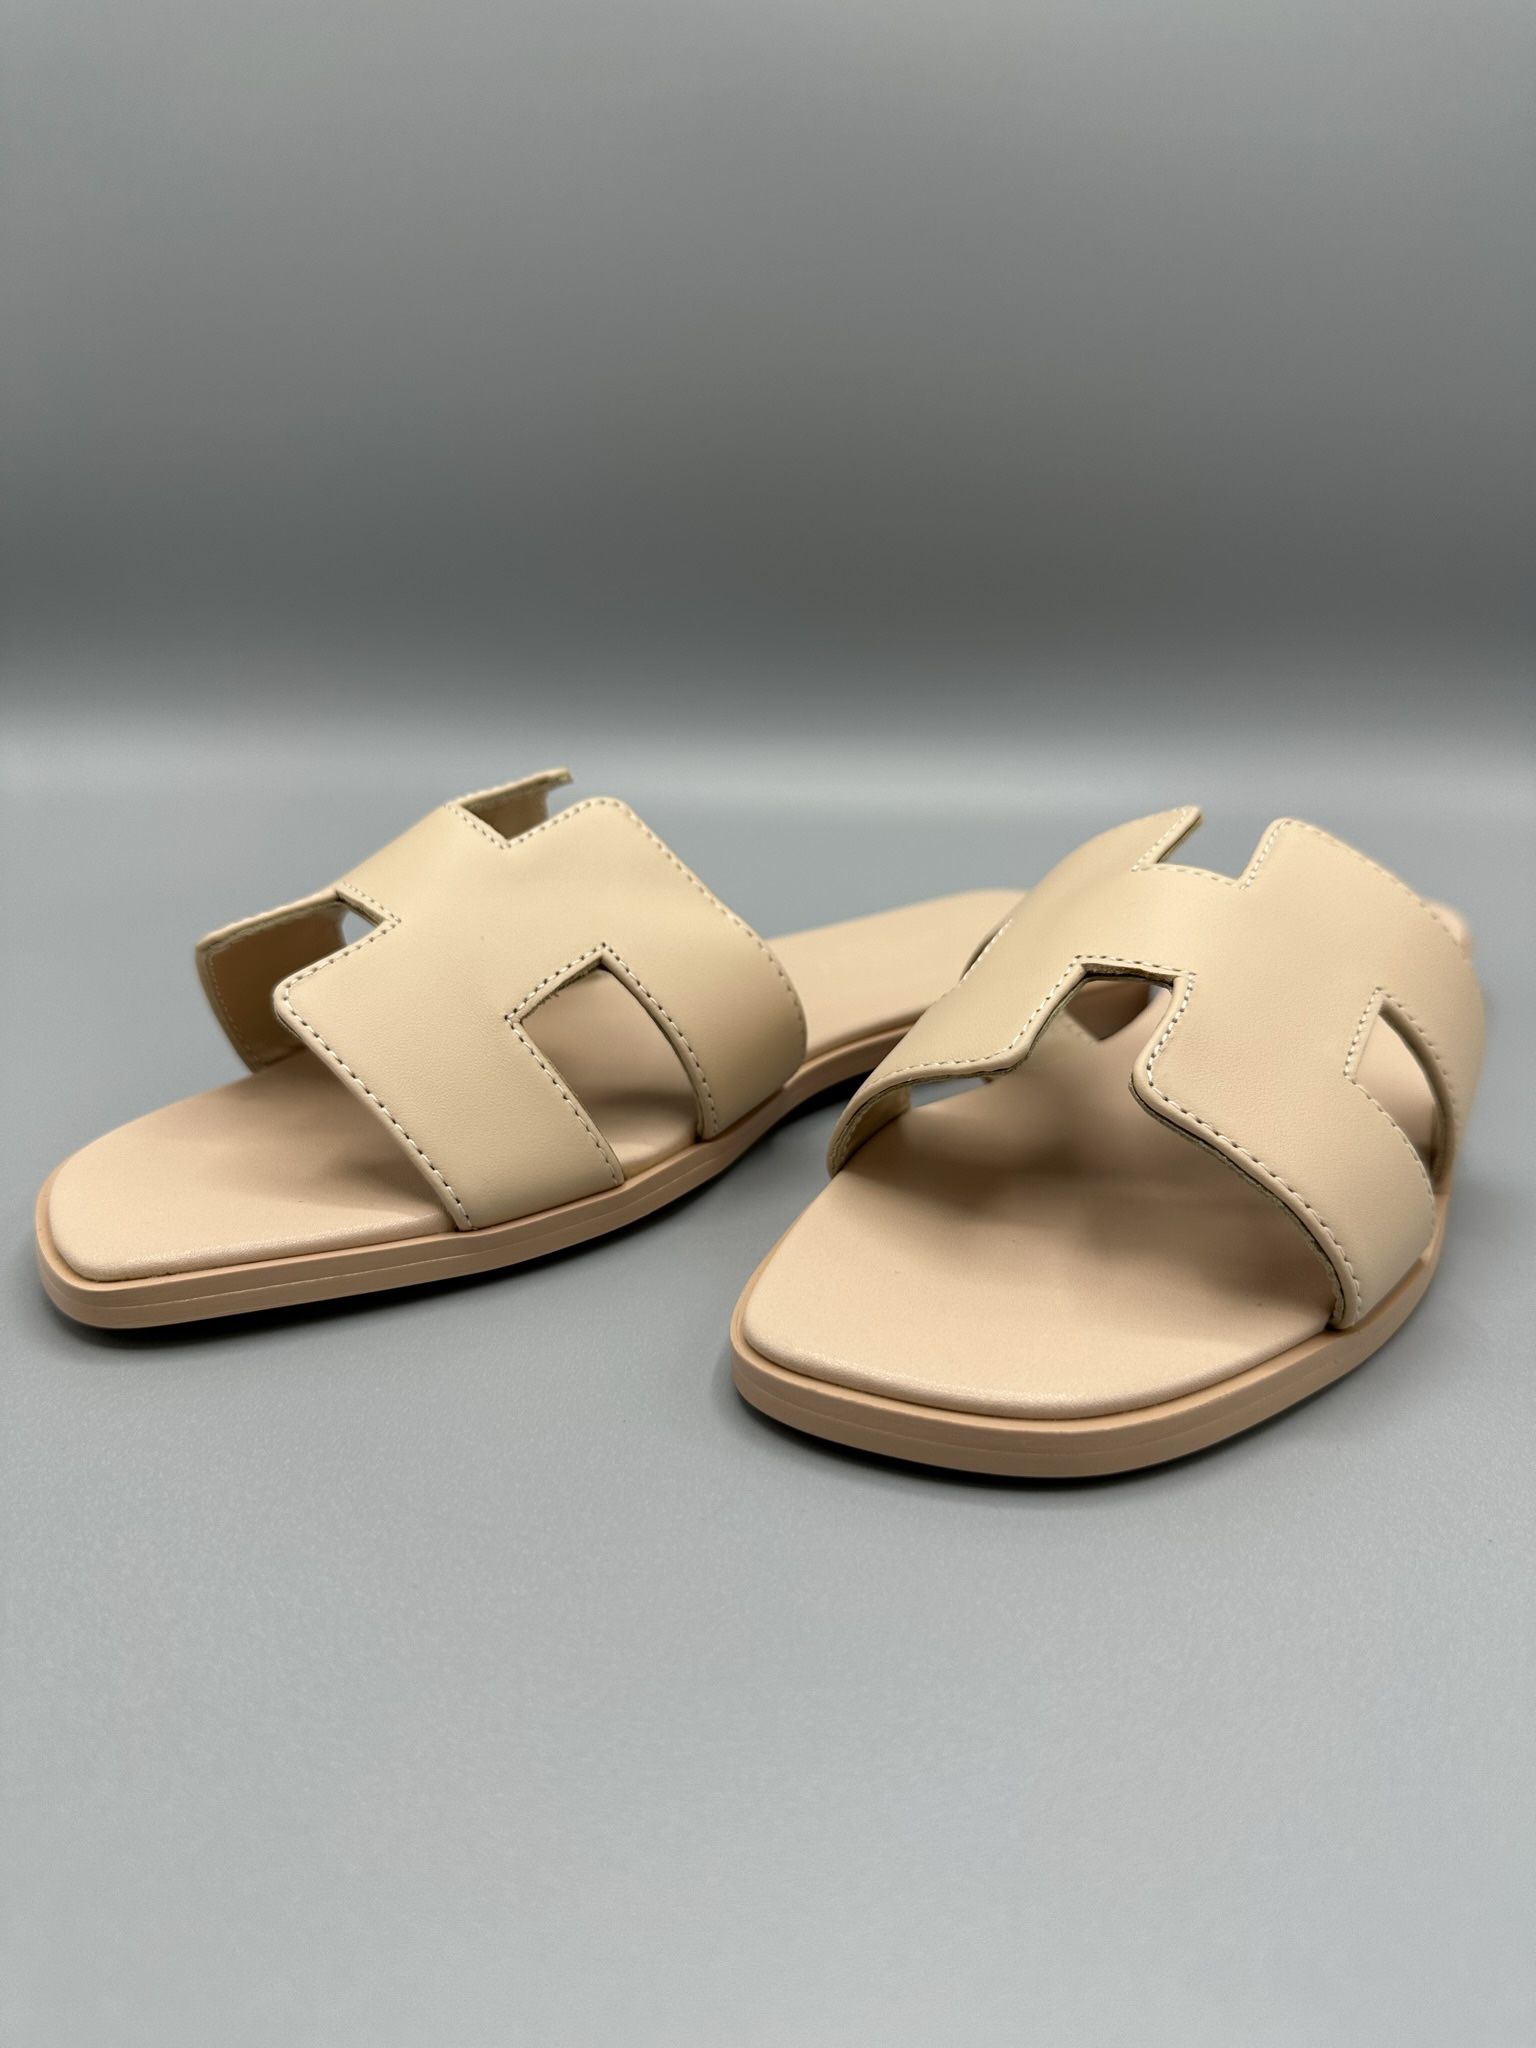 Hermes Oran beige Sandals flat Size 6 New With Hermès Bag  🔸Size 36 🔸 Text me if you’re interested 🚨✅